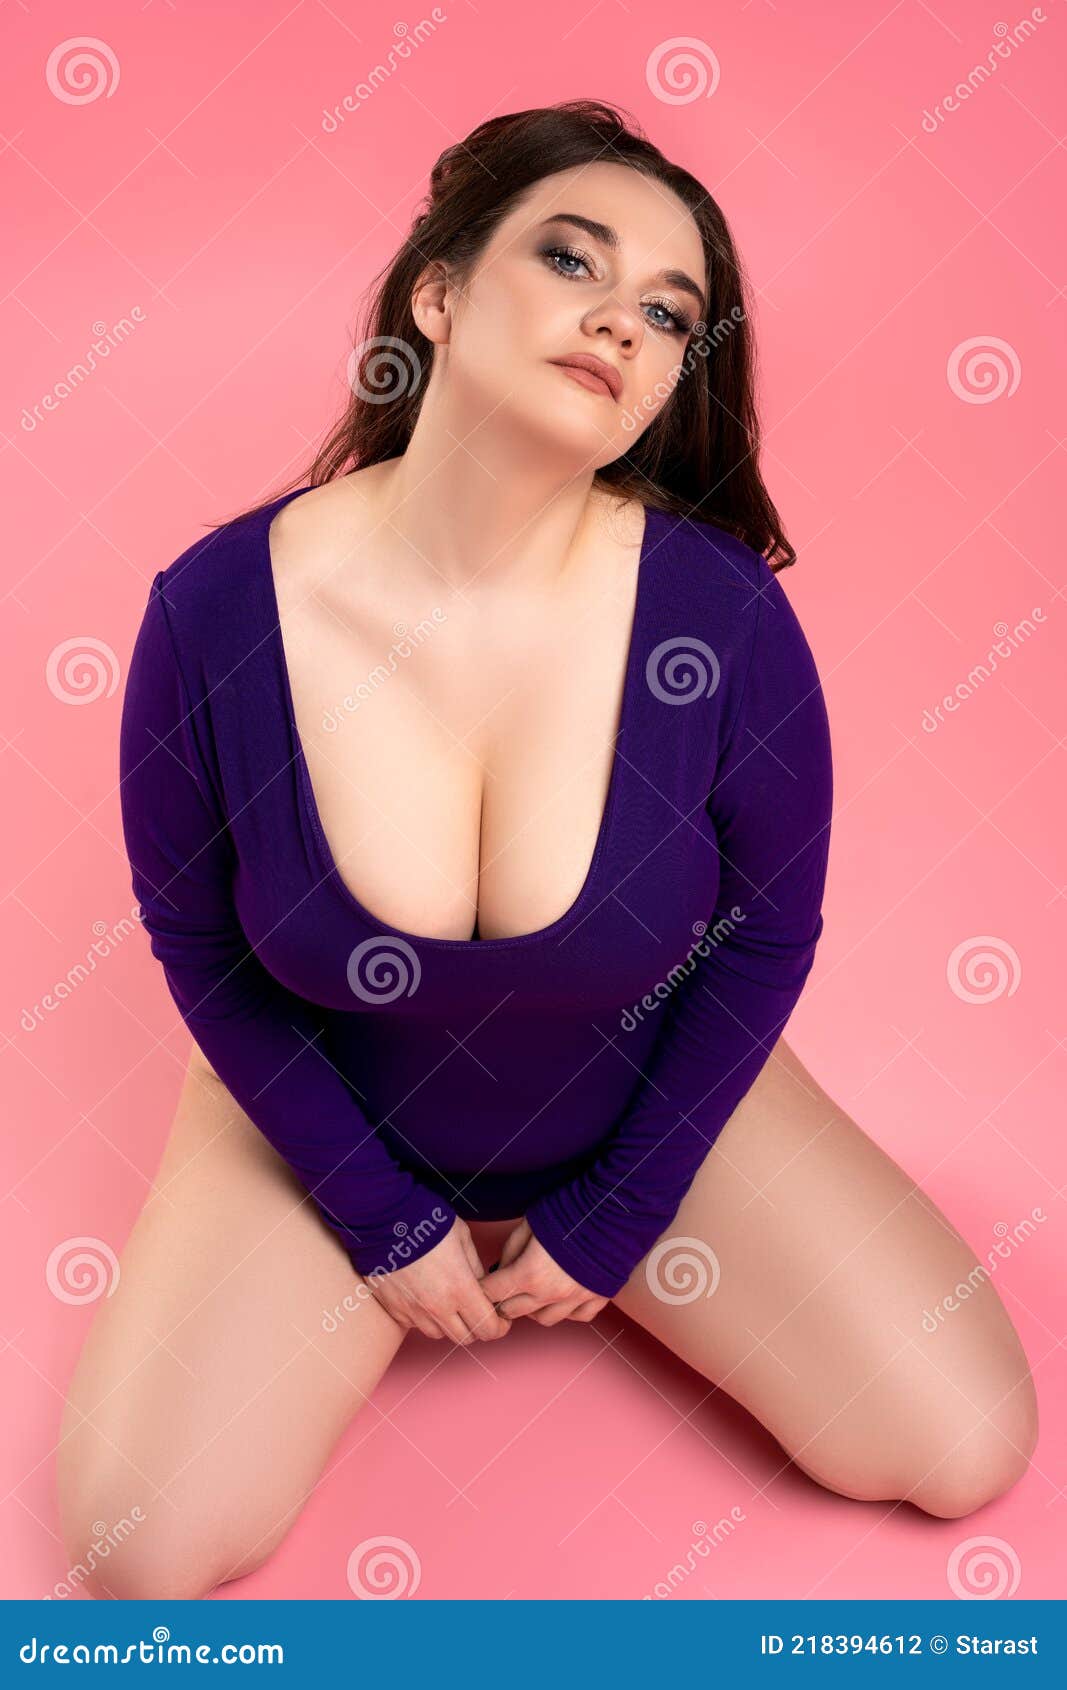 Plus Size Model with Large Breasts in Purple Bodysuit on Pink